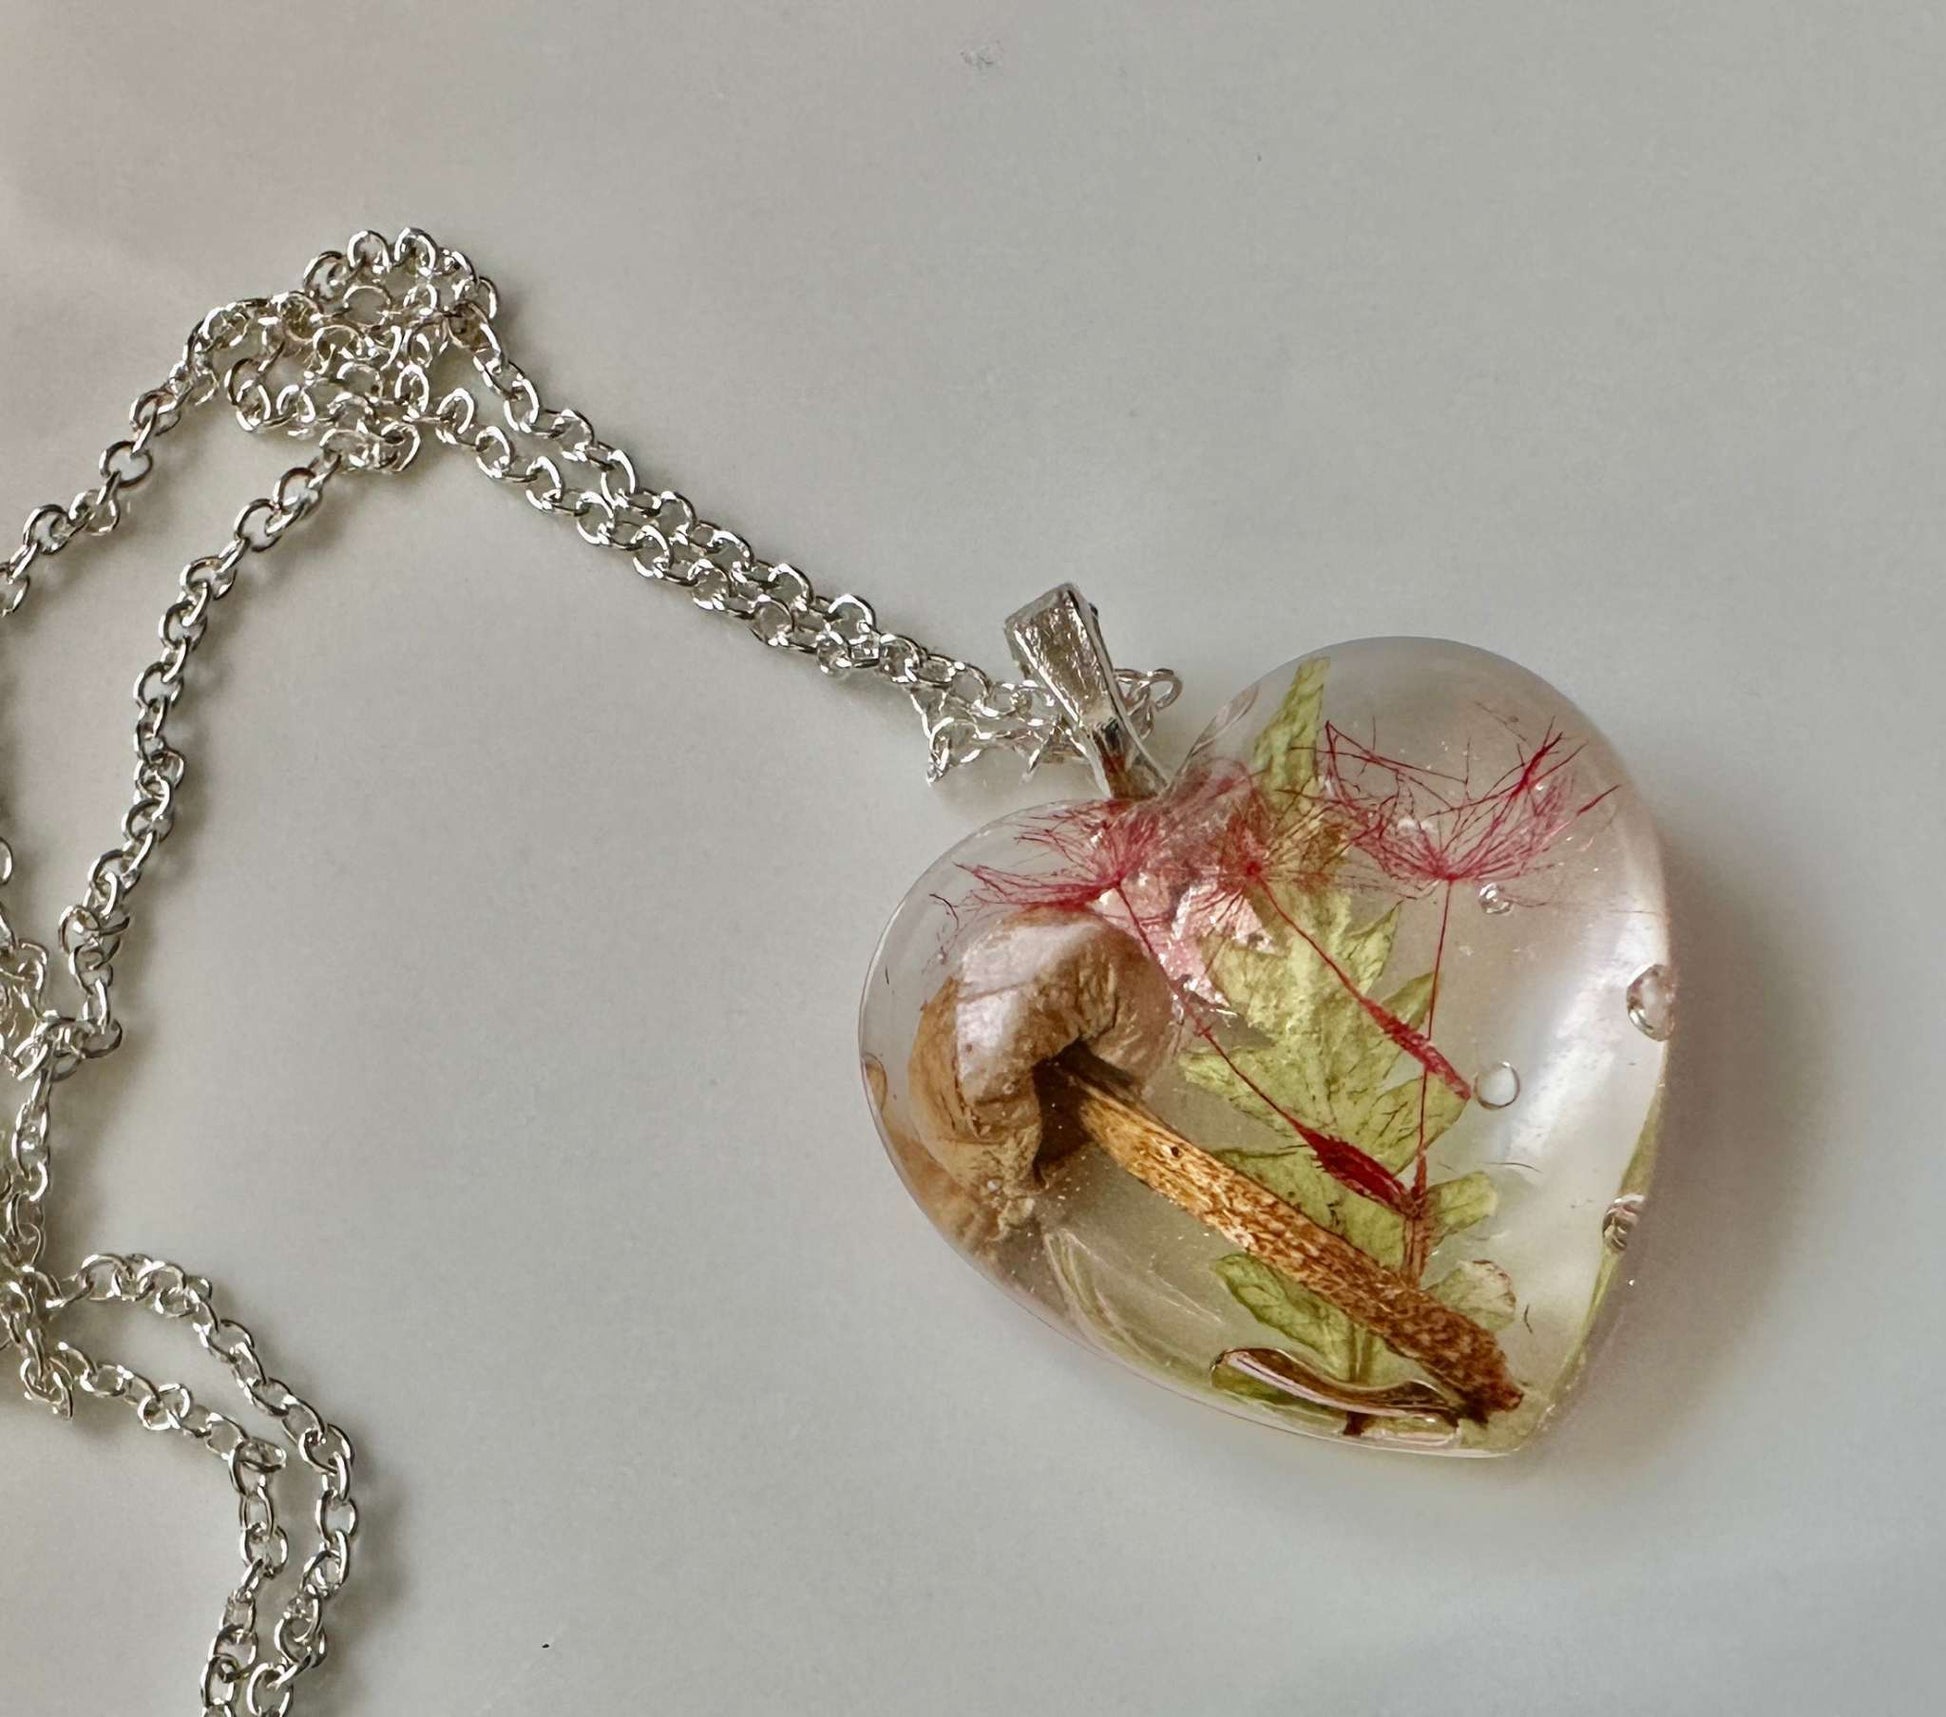 Whimsical Forest Heart Pendant Handmade with Dried Botanicals in Resin